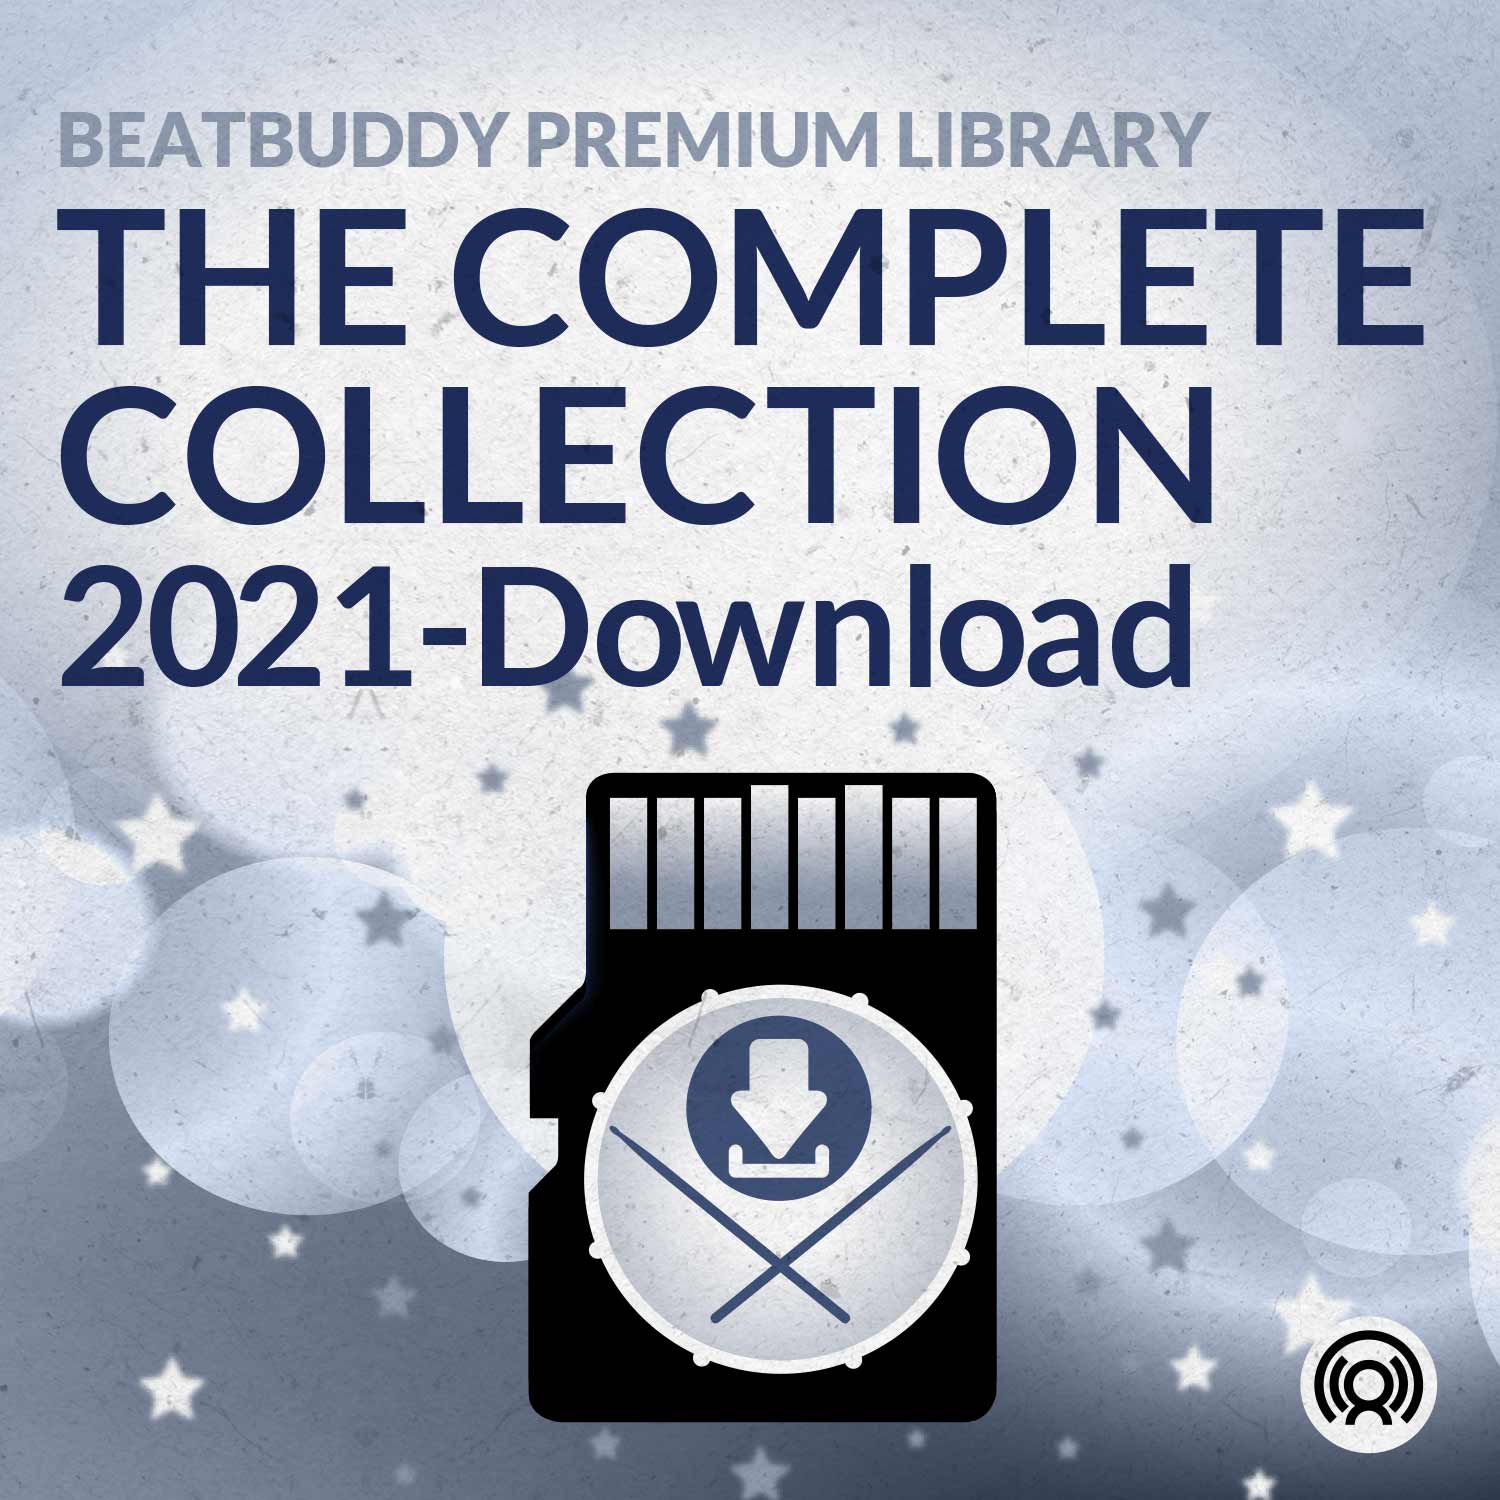 Complete Collection 2021 for BeatBuddy cover art